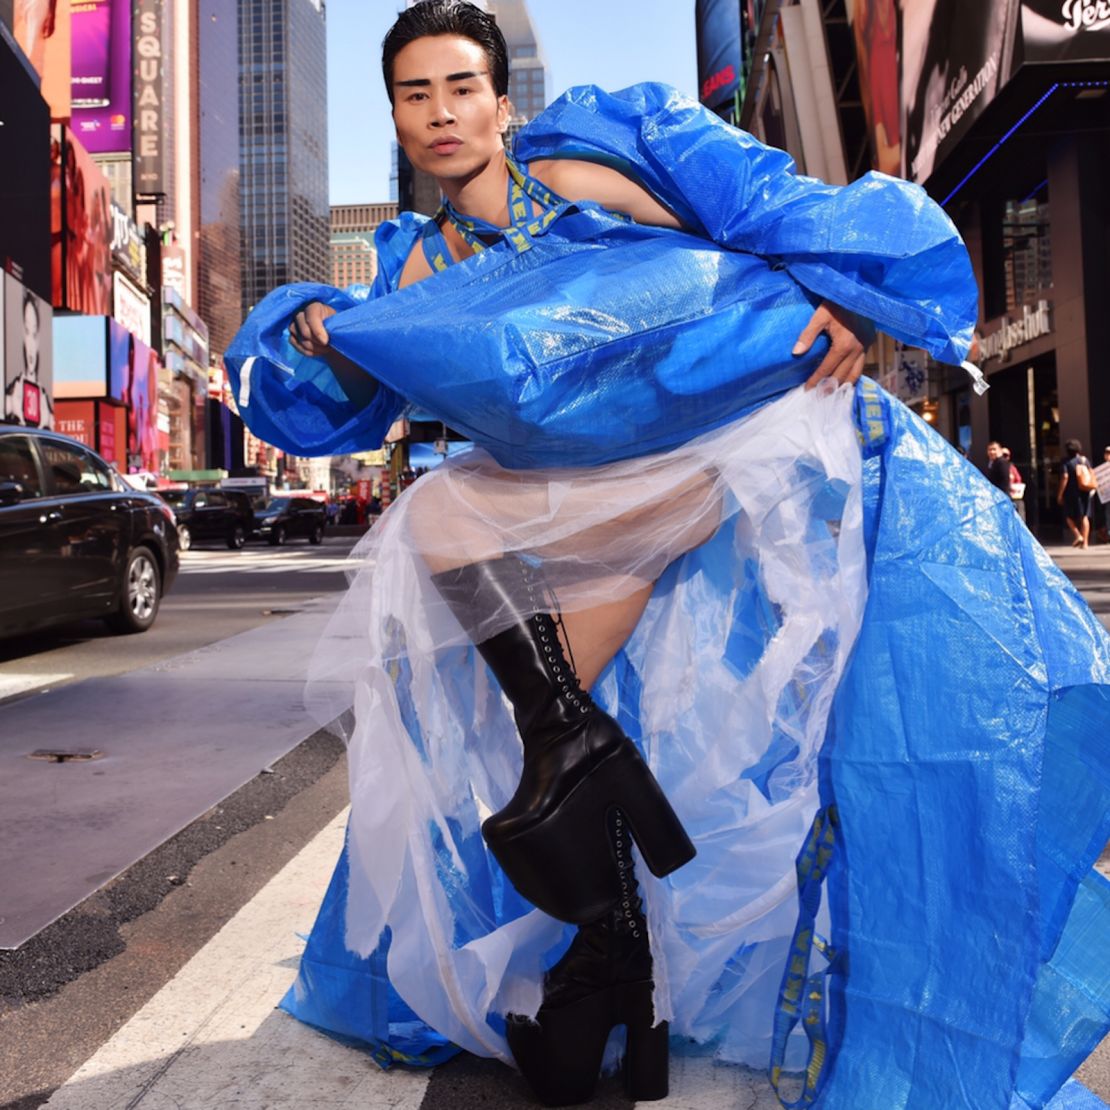 An image taken in New York's Times Square shows Wan dressed in a bright blue gown made of IKEA shopping bags.